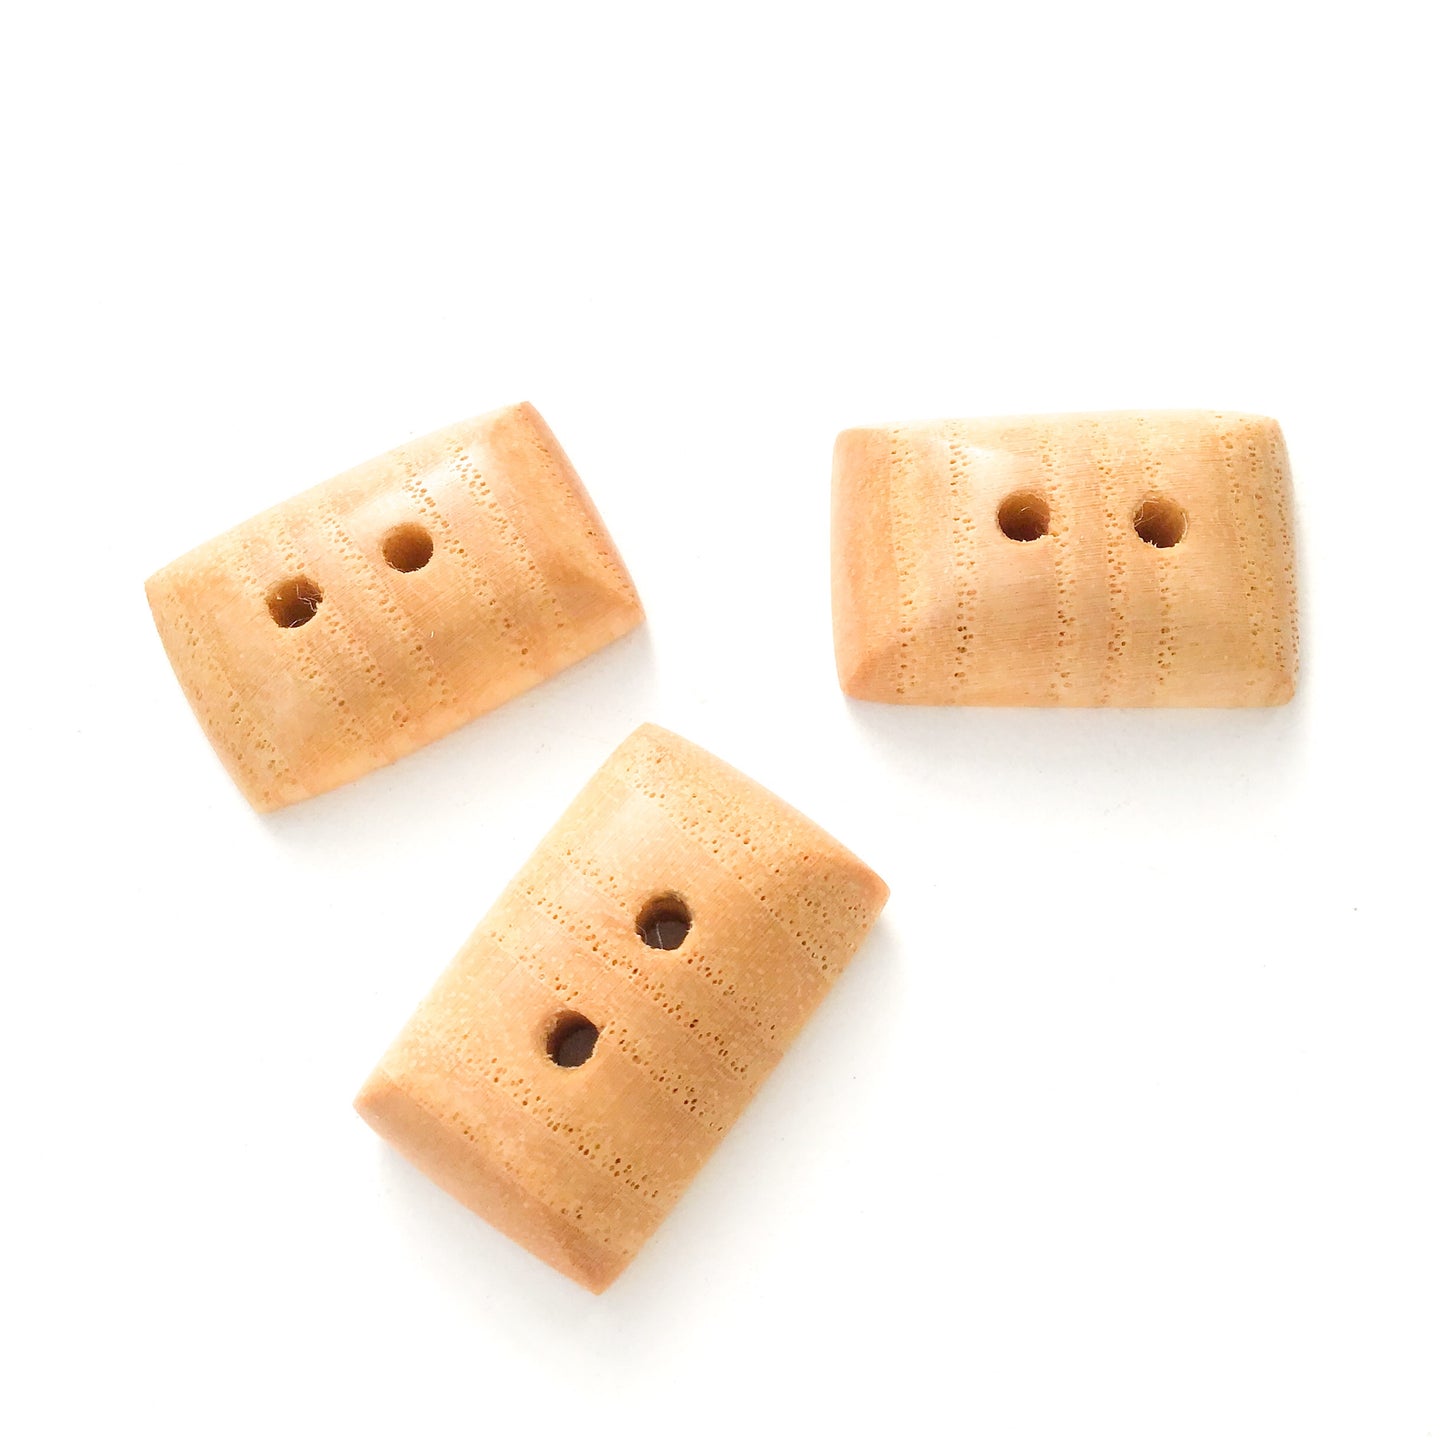 Ash Wood Buttons - Rounded Edge Rectangular Wood Buttons - 3/8" x 1" - 3 Pack